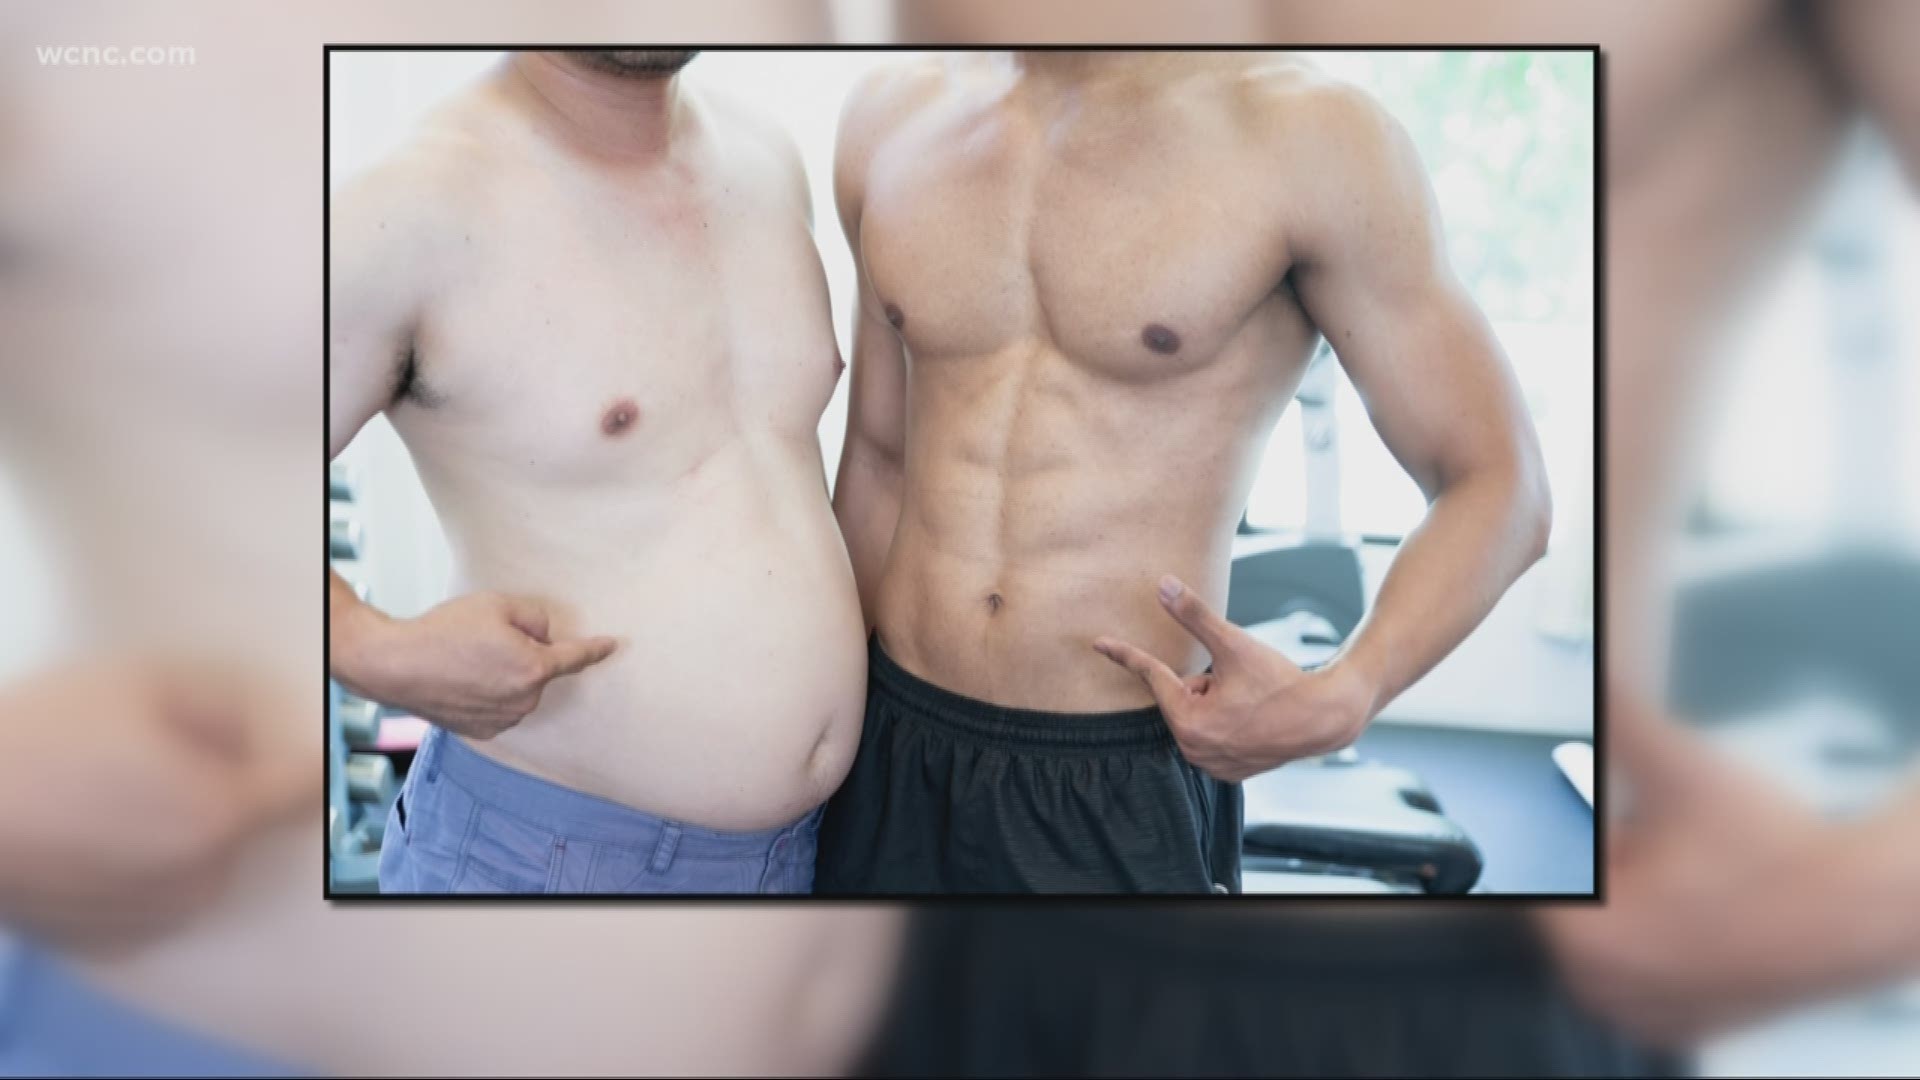 Guys, stop sucking in your belly and wear it with pride. According to a new survey, 80% of men with dad bods are happy with their physique and 70% of people polled say a dad bod is actually a turn-on.